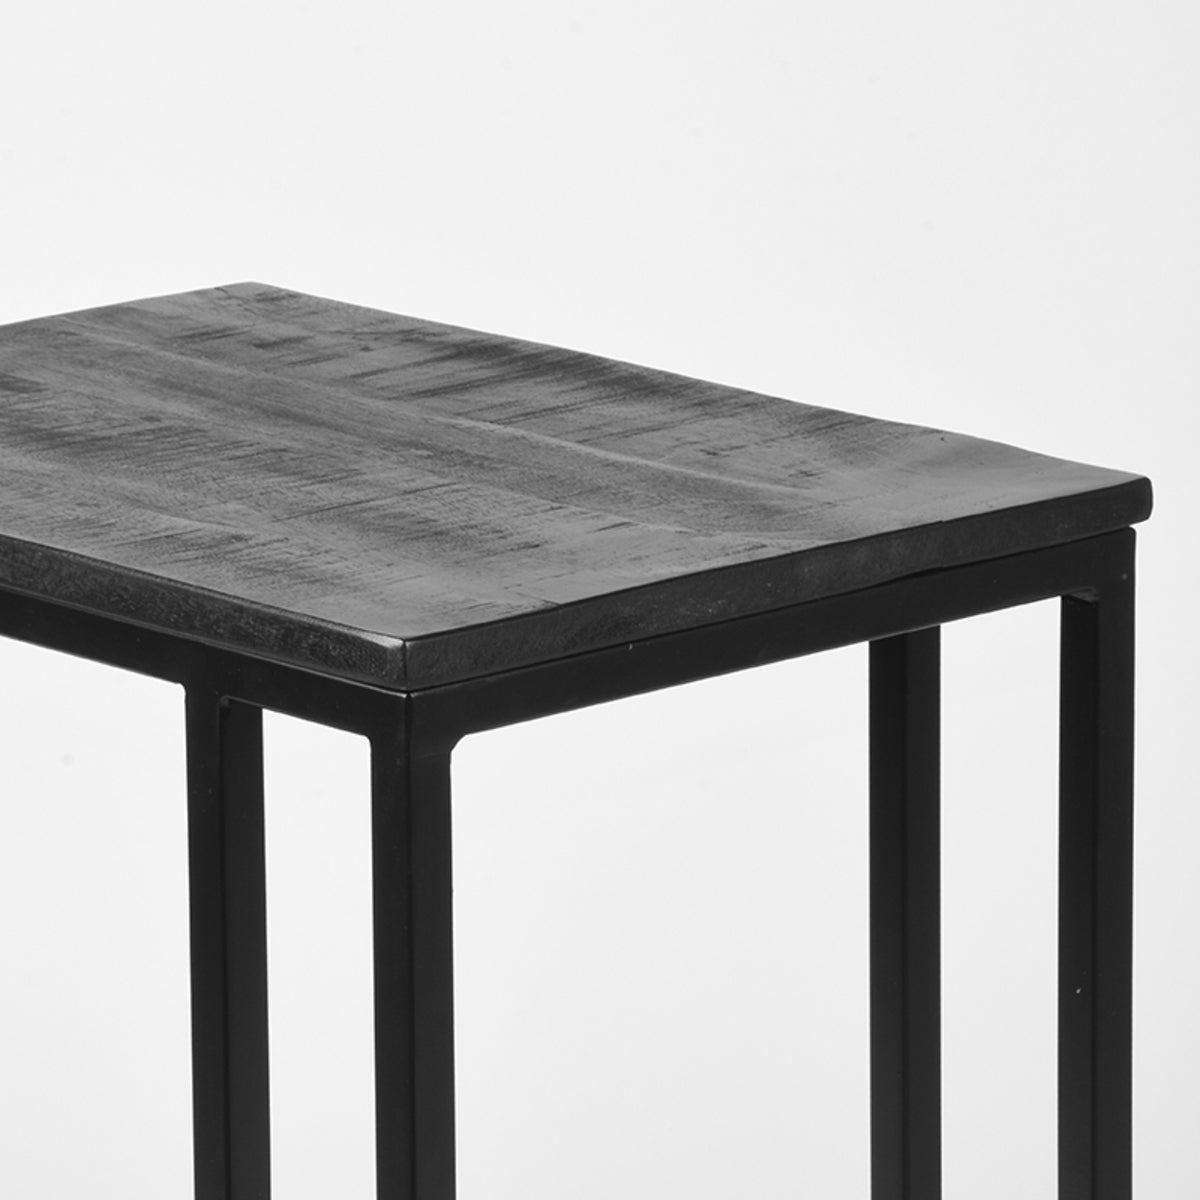 Nancy's Side Table Move - Laptop table - Side tables - Industrial - Wood - Black - 35 x 50 x 61 cm